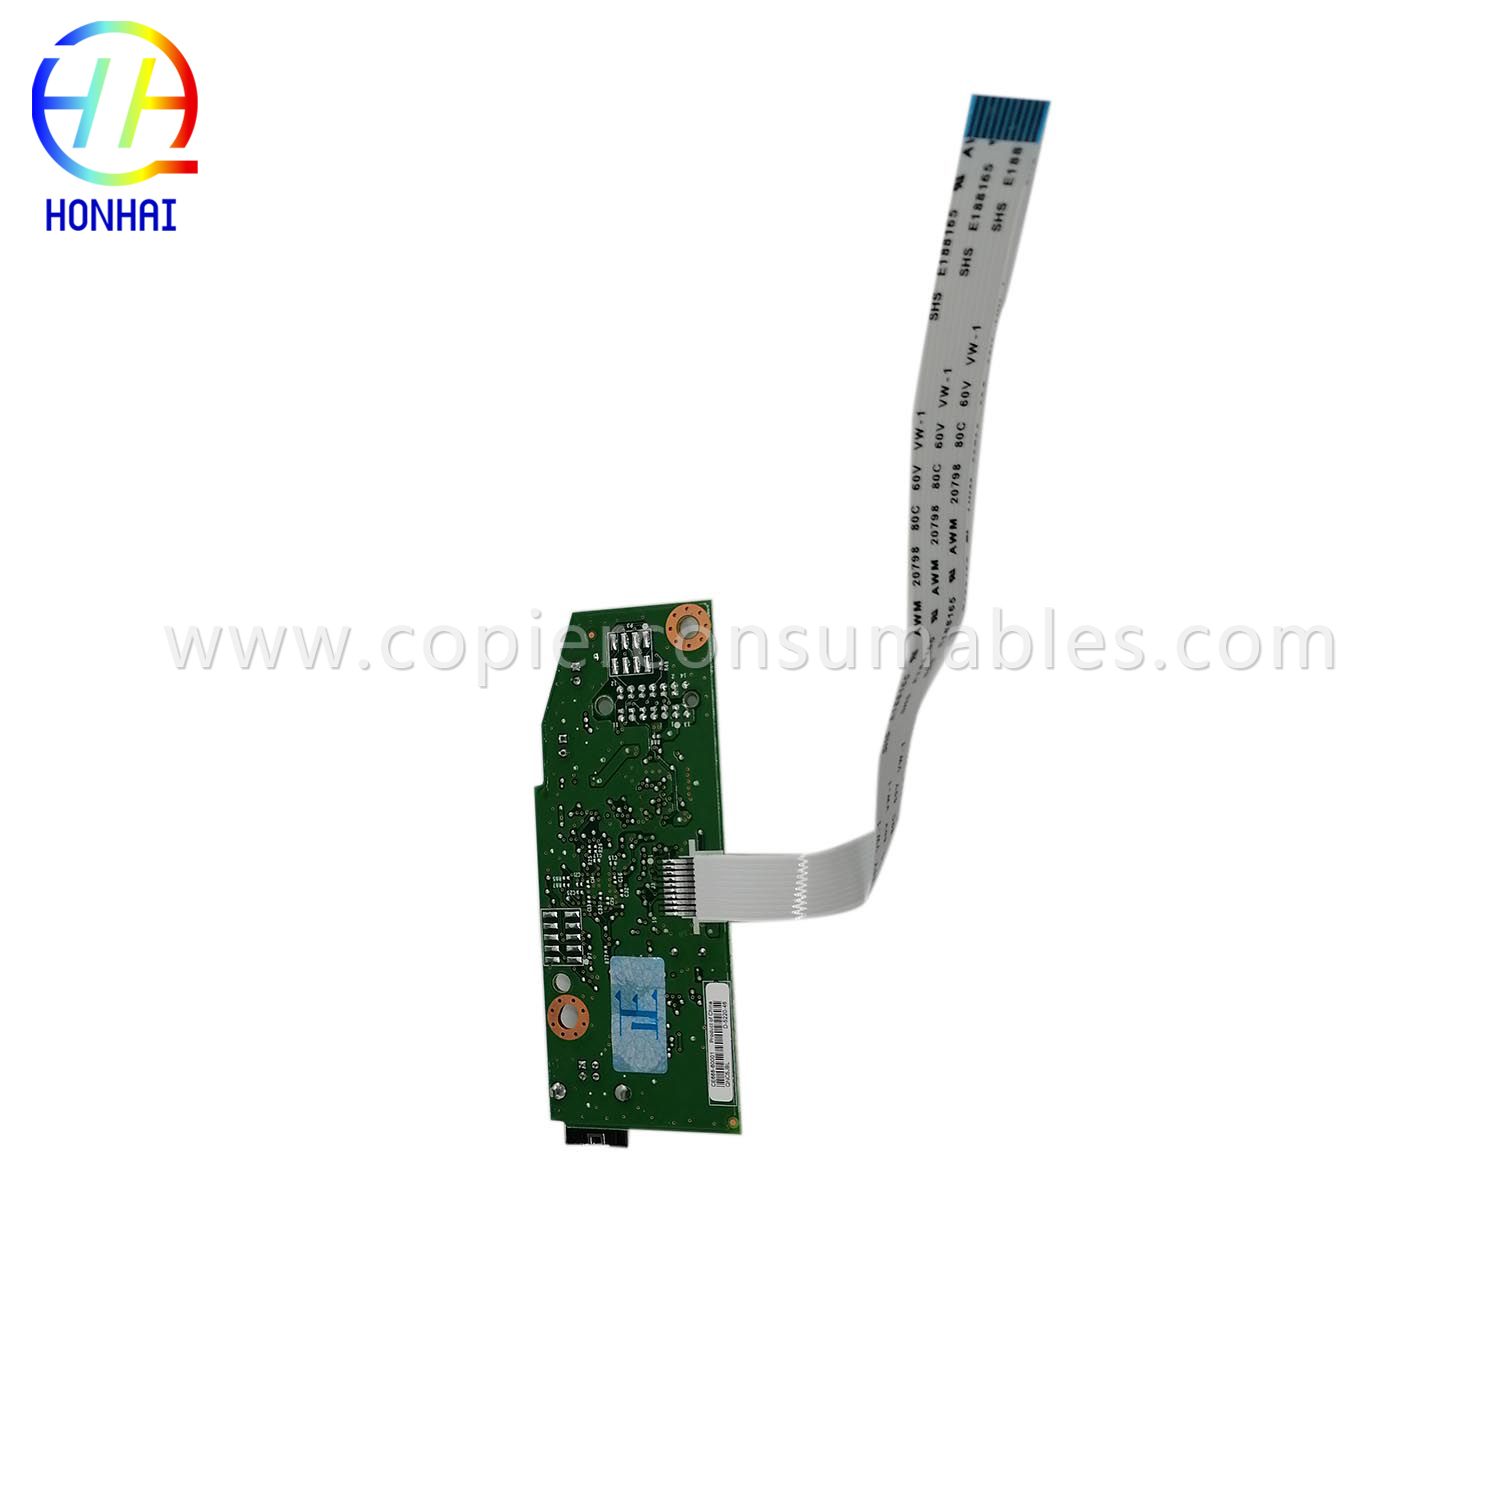 MAIN BOARD FOR HP Laser jet 1102 RM1-7600-020CN (3) 拷贝